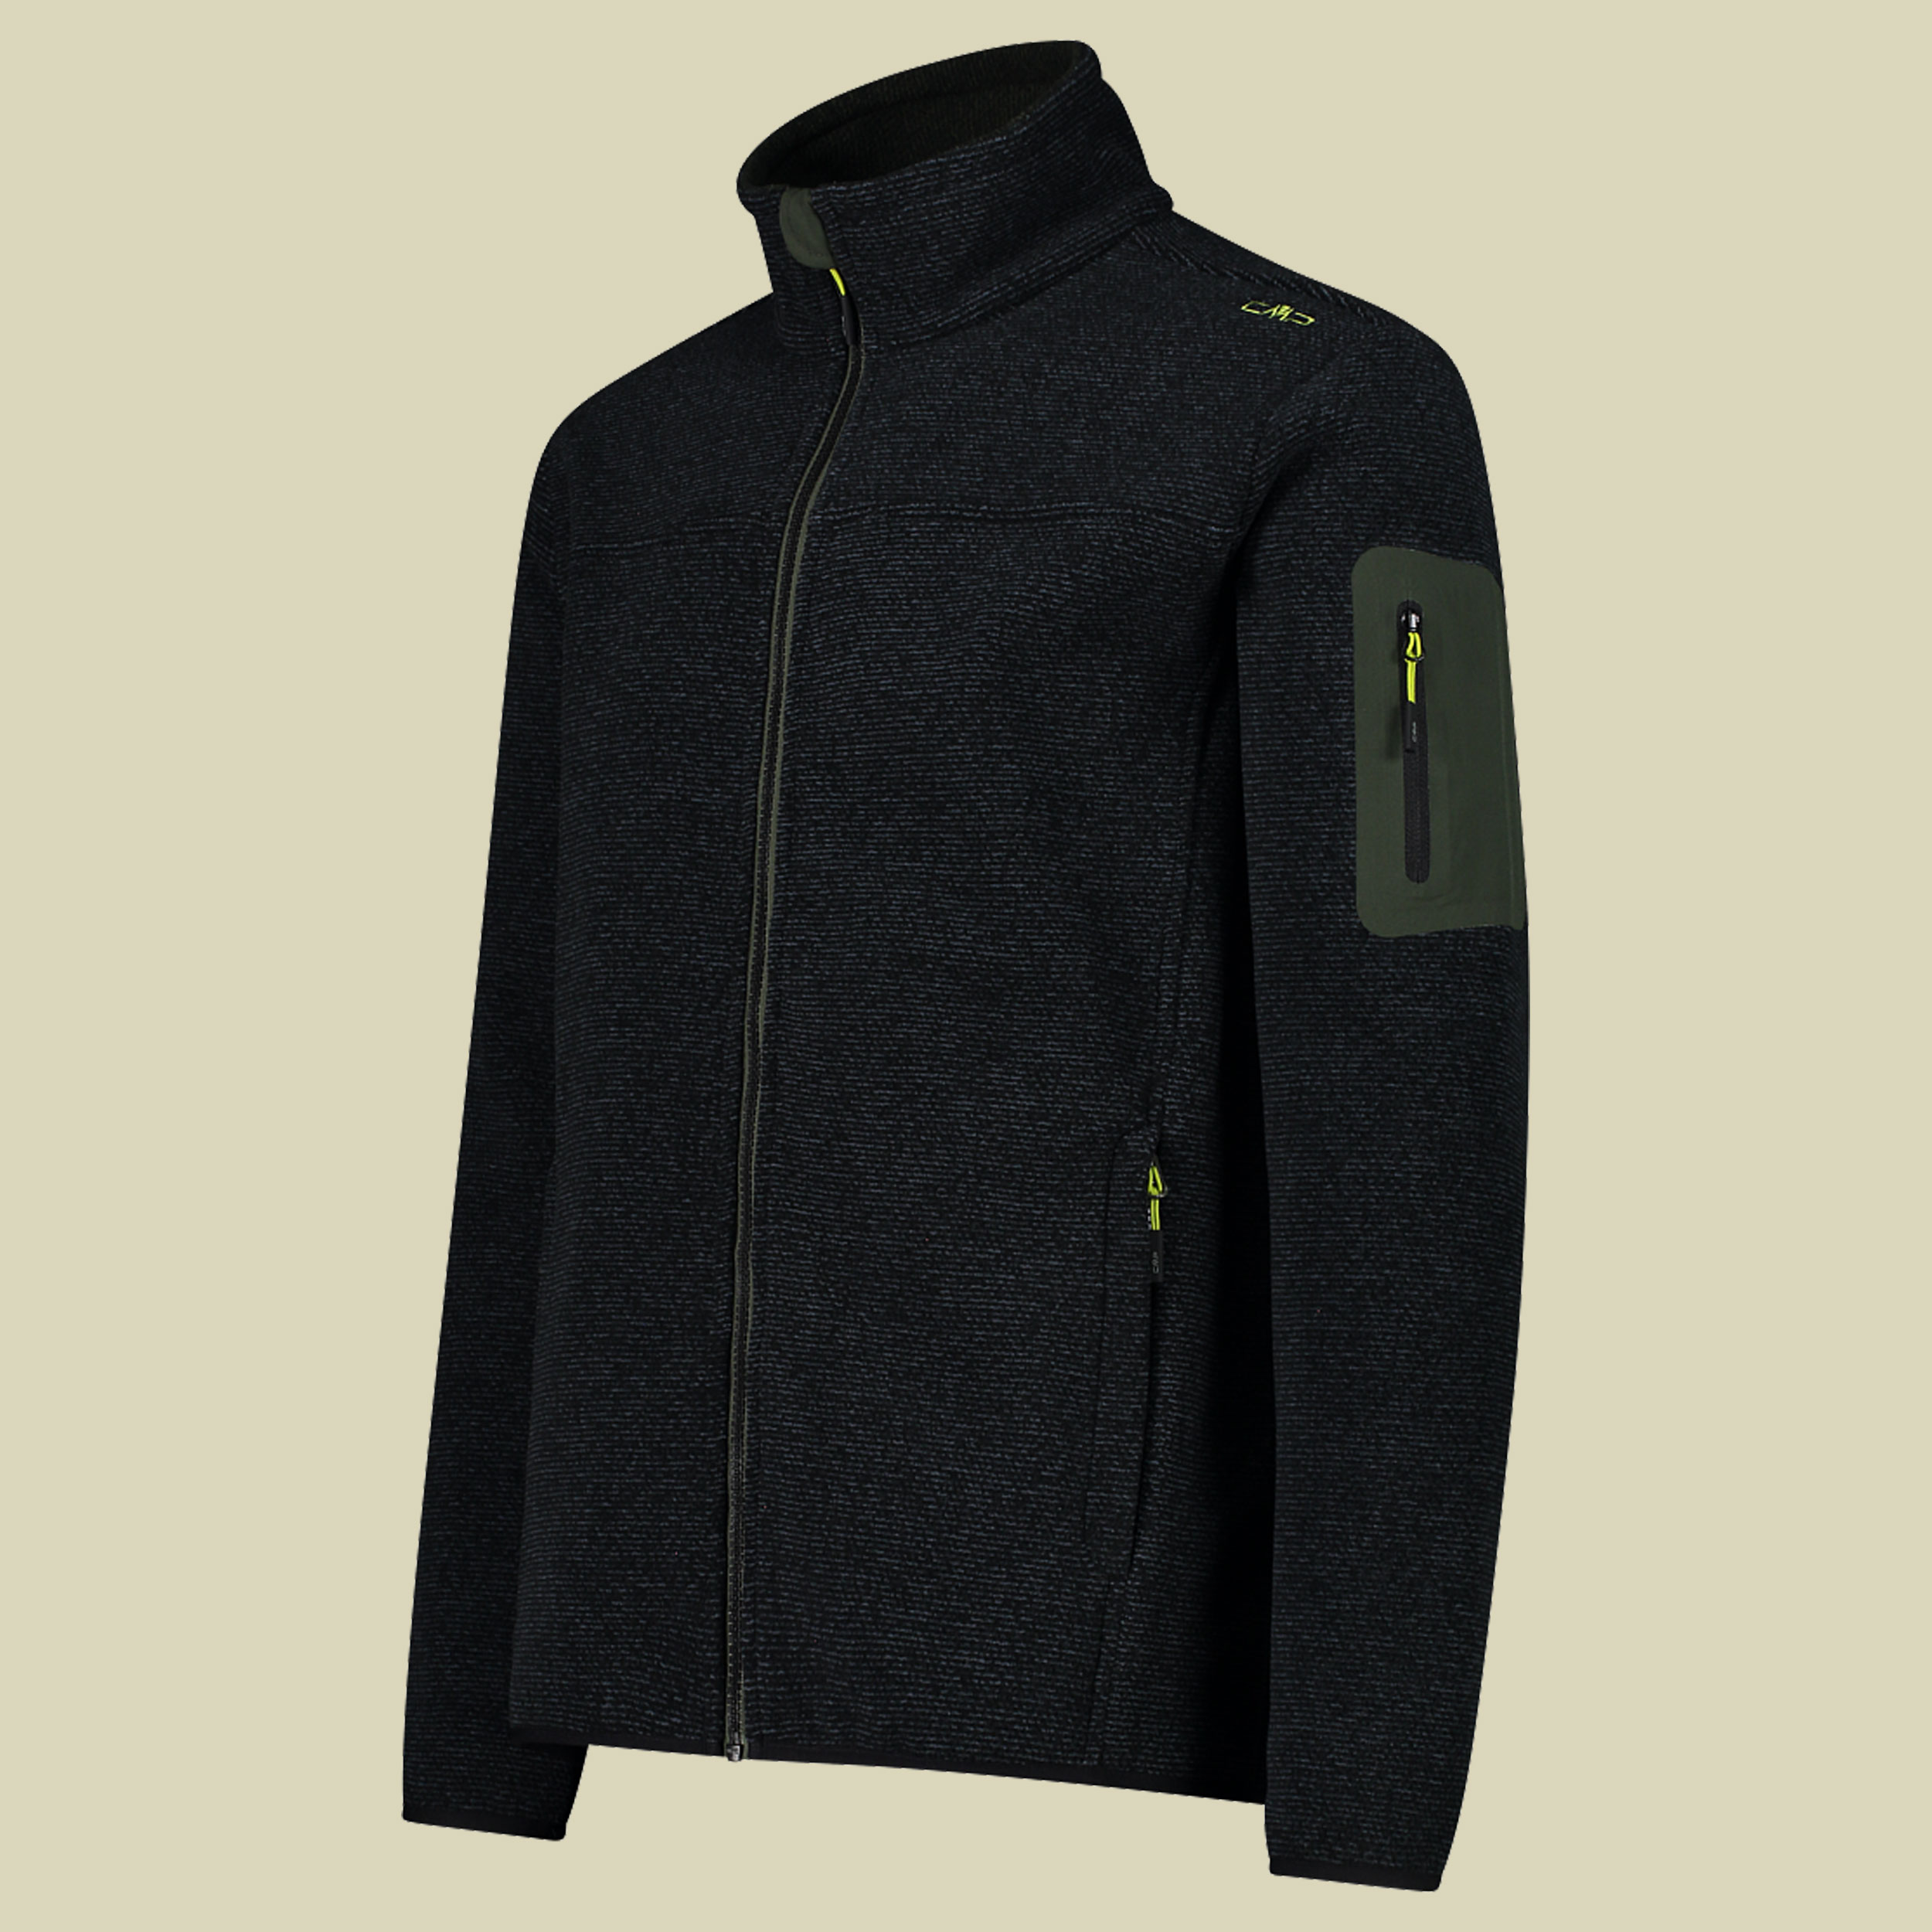 Man Jacket Knitted Jacquard 38H2237 Größe 58 Farbe 29UP nero-oil green